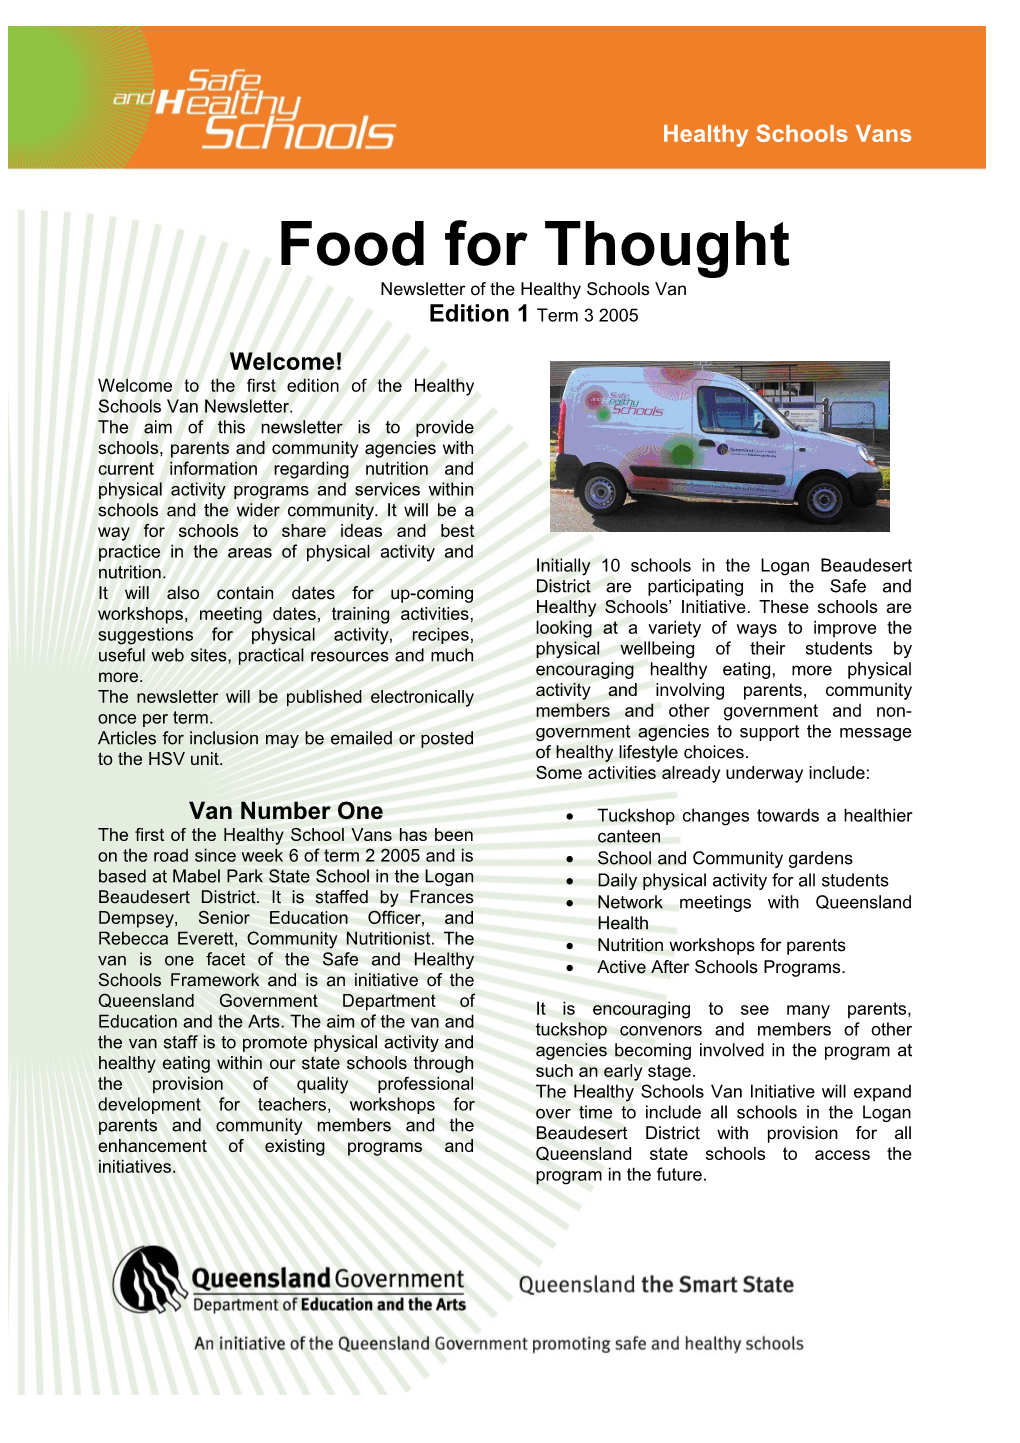 Food for Thought - Edition 1 Term 3 2005